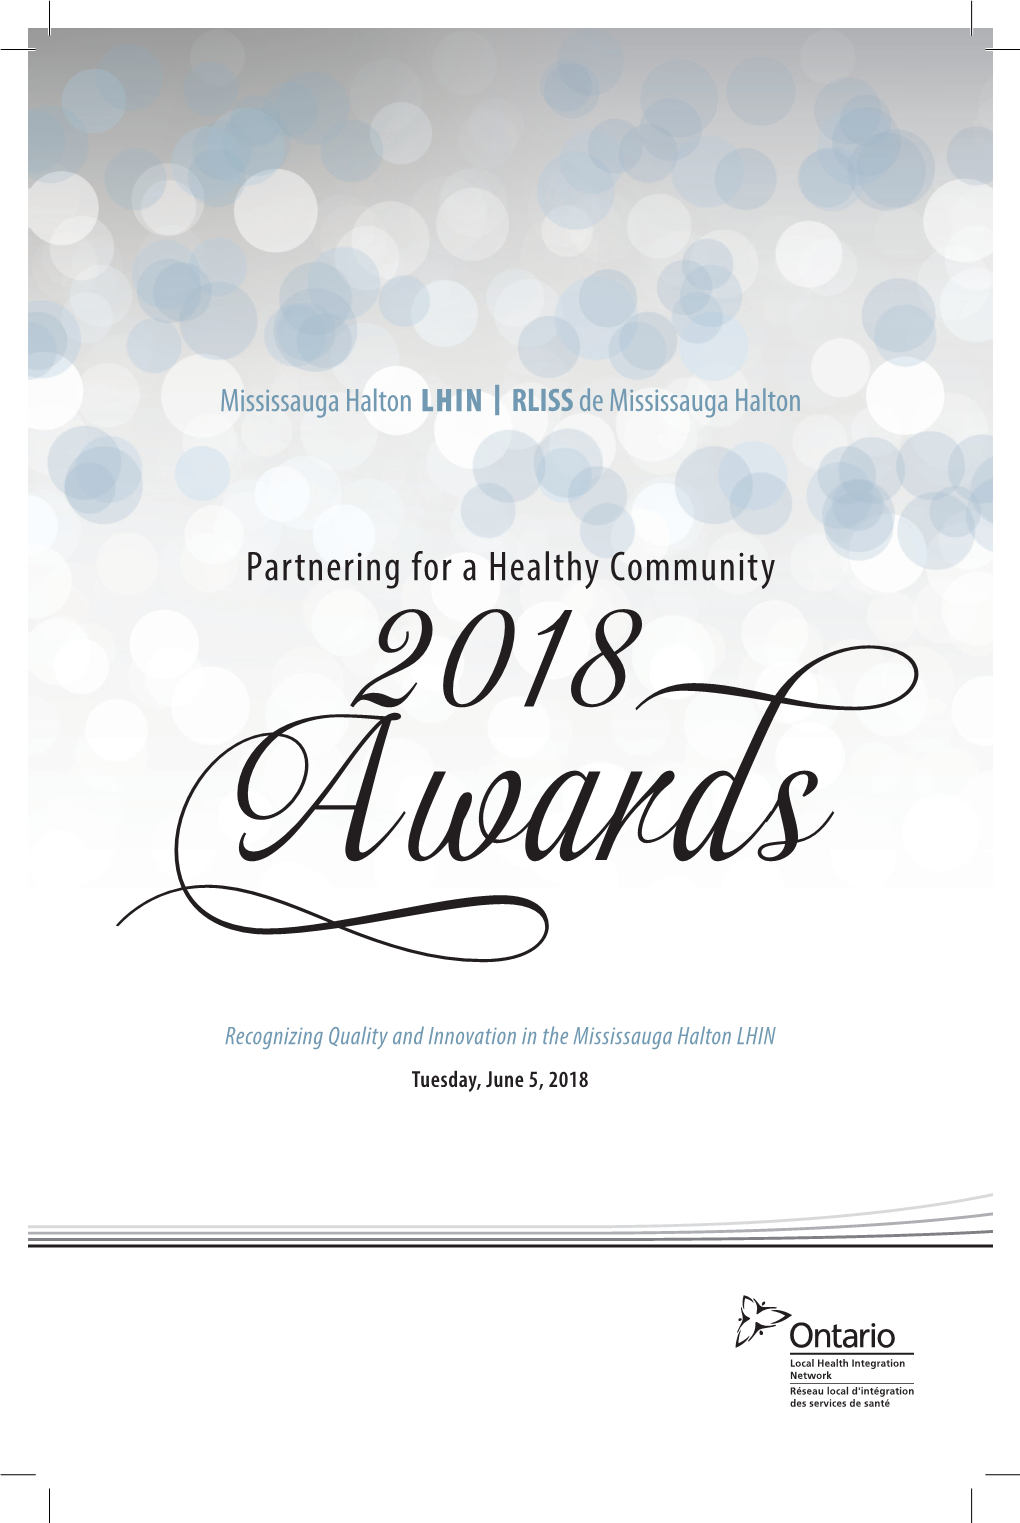 Partnering for a Healthy Community 2018 Awards